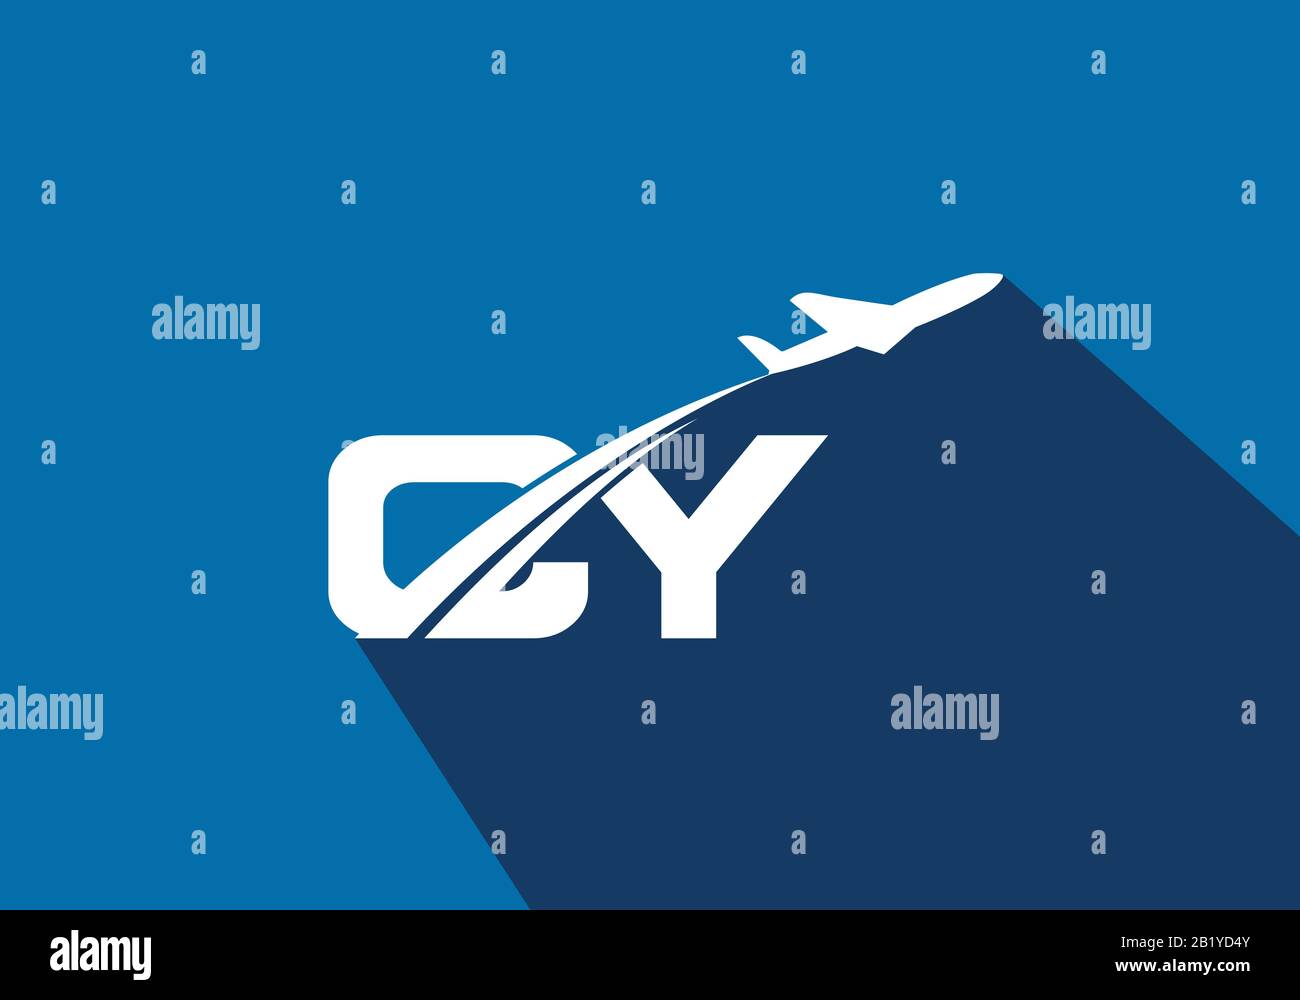 Initial Letter C and Y  with Aviation Logo Design, Air, Airline, Airplane and Travel Logo template. Stock Vector